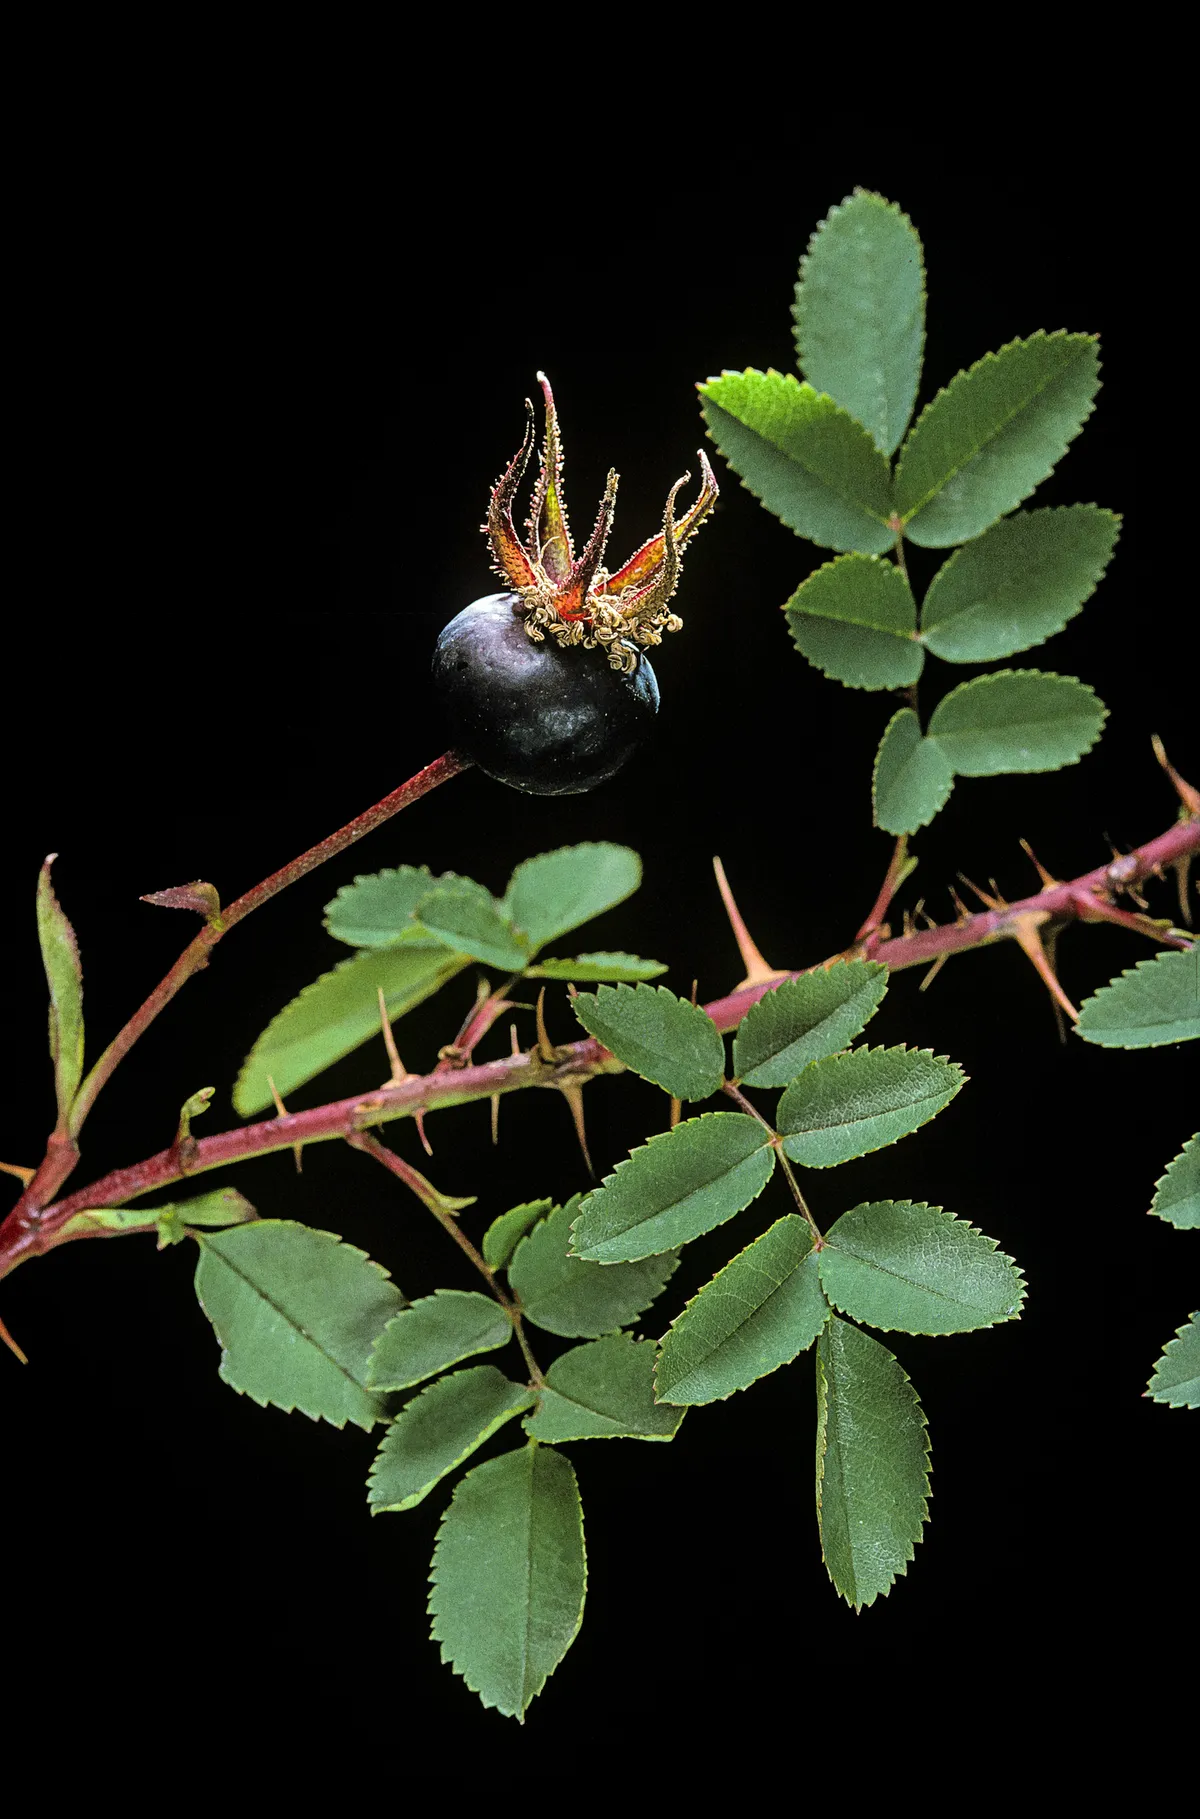 A black rosehip and green leaves, against a black background.